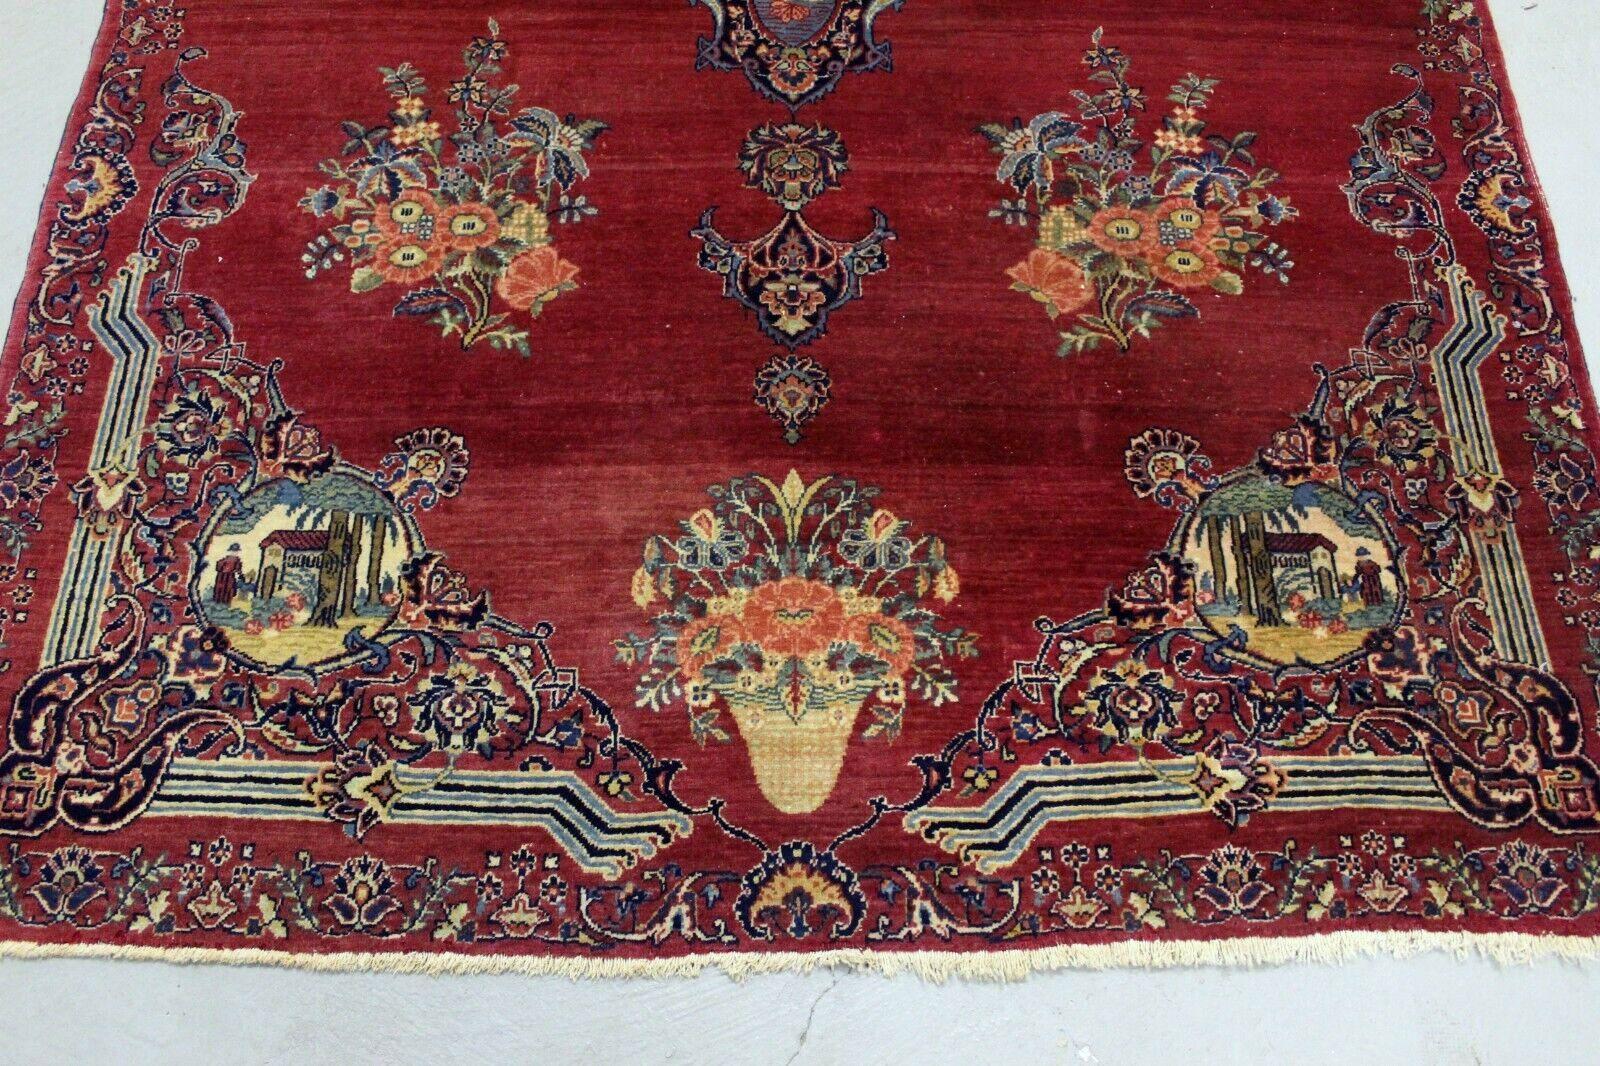 Handmade Antique Persian Style Kerman Rug 4.3' x 6.7', 1920s - 1K45 In Good Condition For Sale In Bordeaux, FR